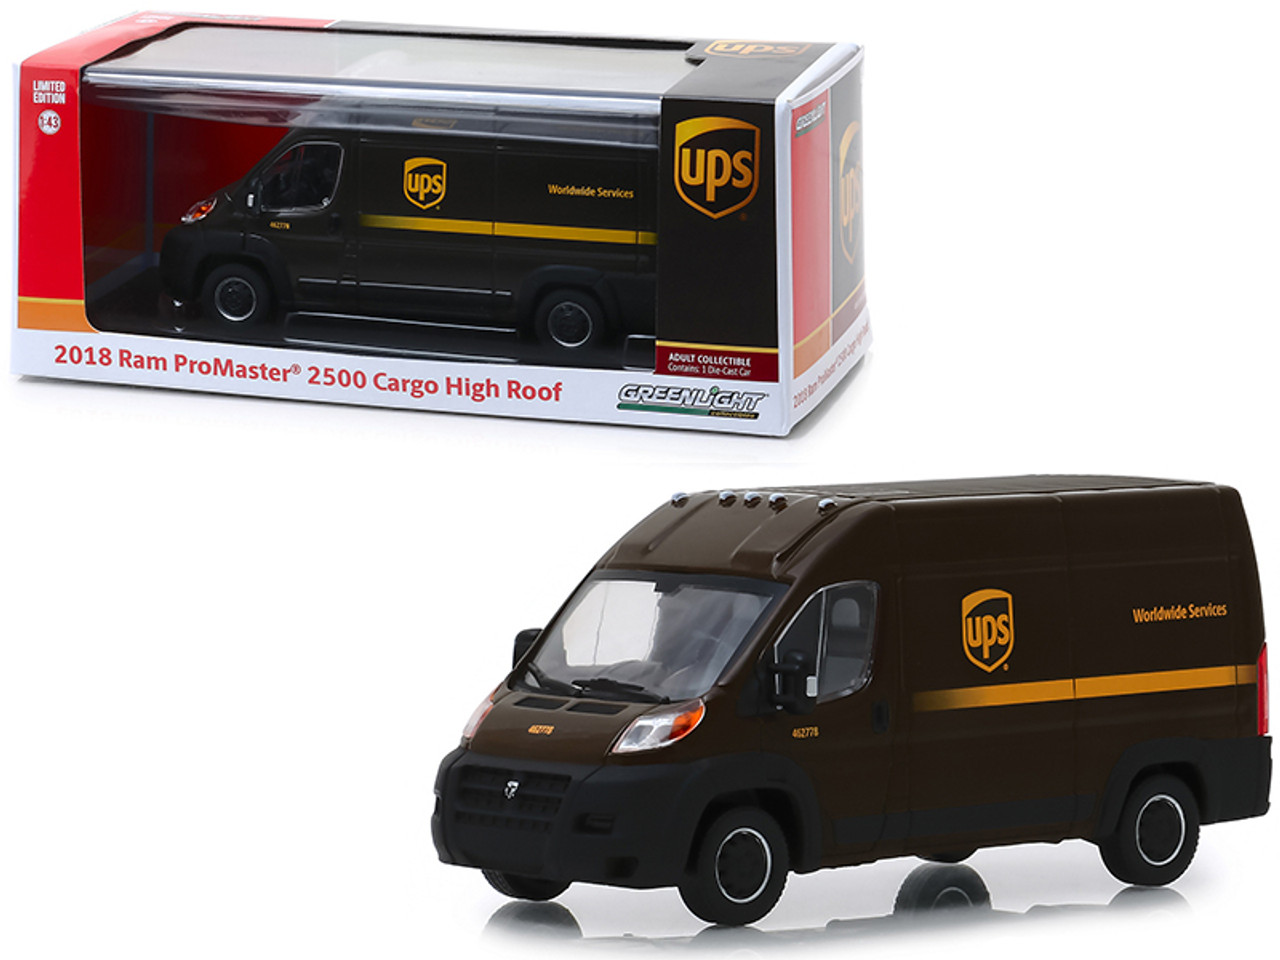 2018 RAM ProMaster 2500 Cargo High Roof "United Parcel Service" (UPS) "Worldwide Services" Dark Brown 1/43 Diecast Model Car by Greenlight